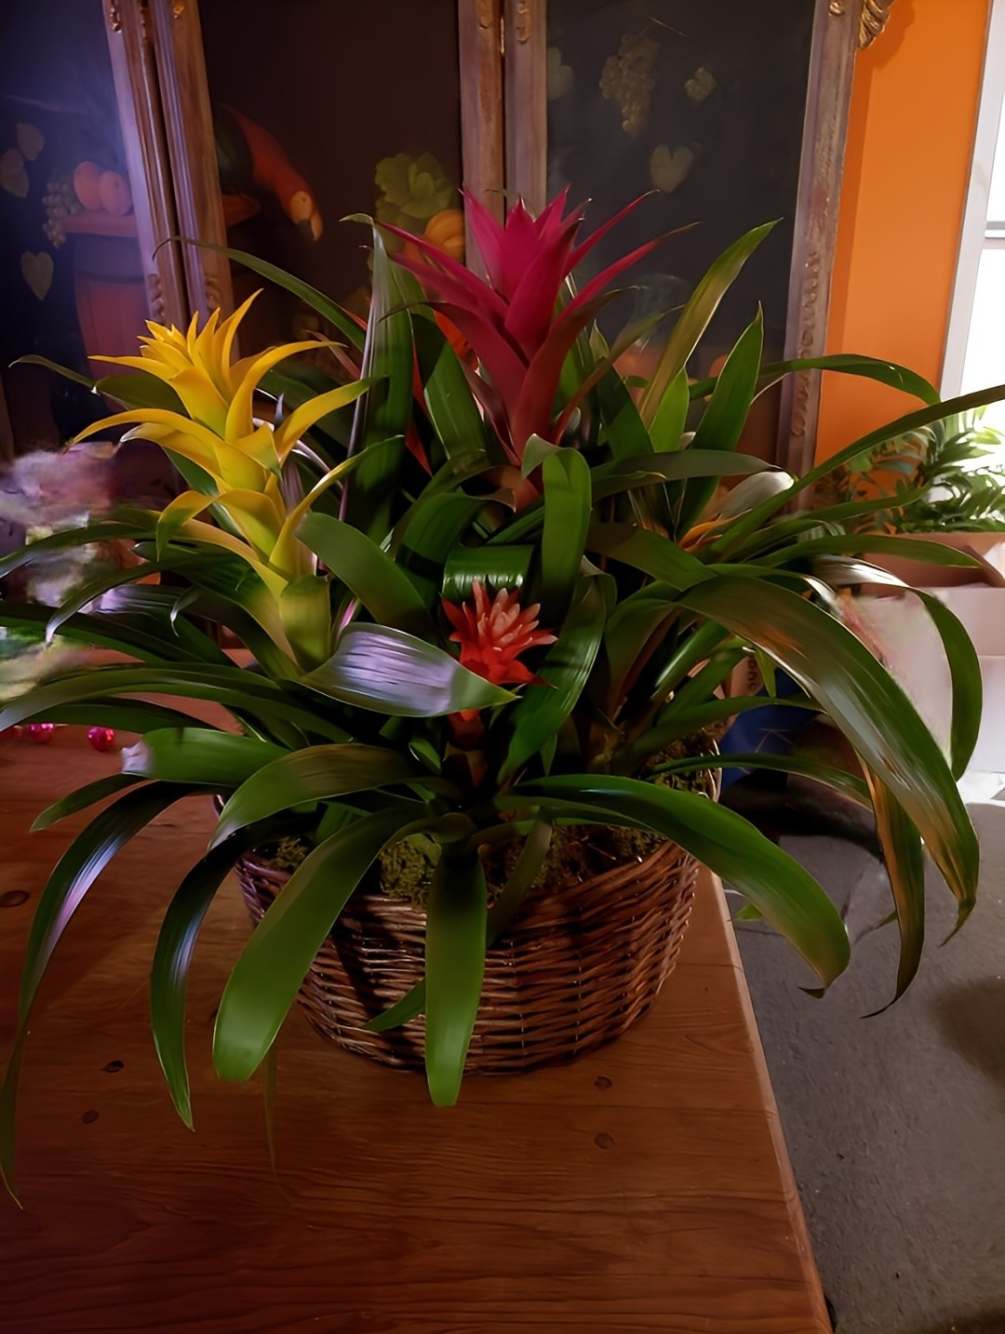 Three Bright Tropical Bromeliad Plants Presented in a Garden Style Basket